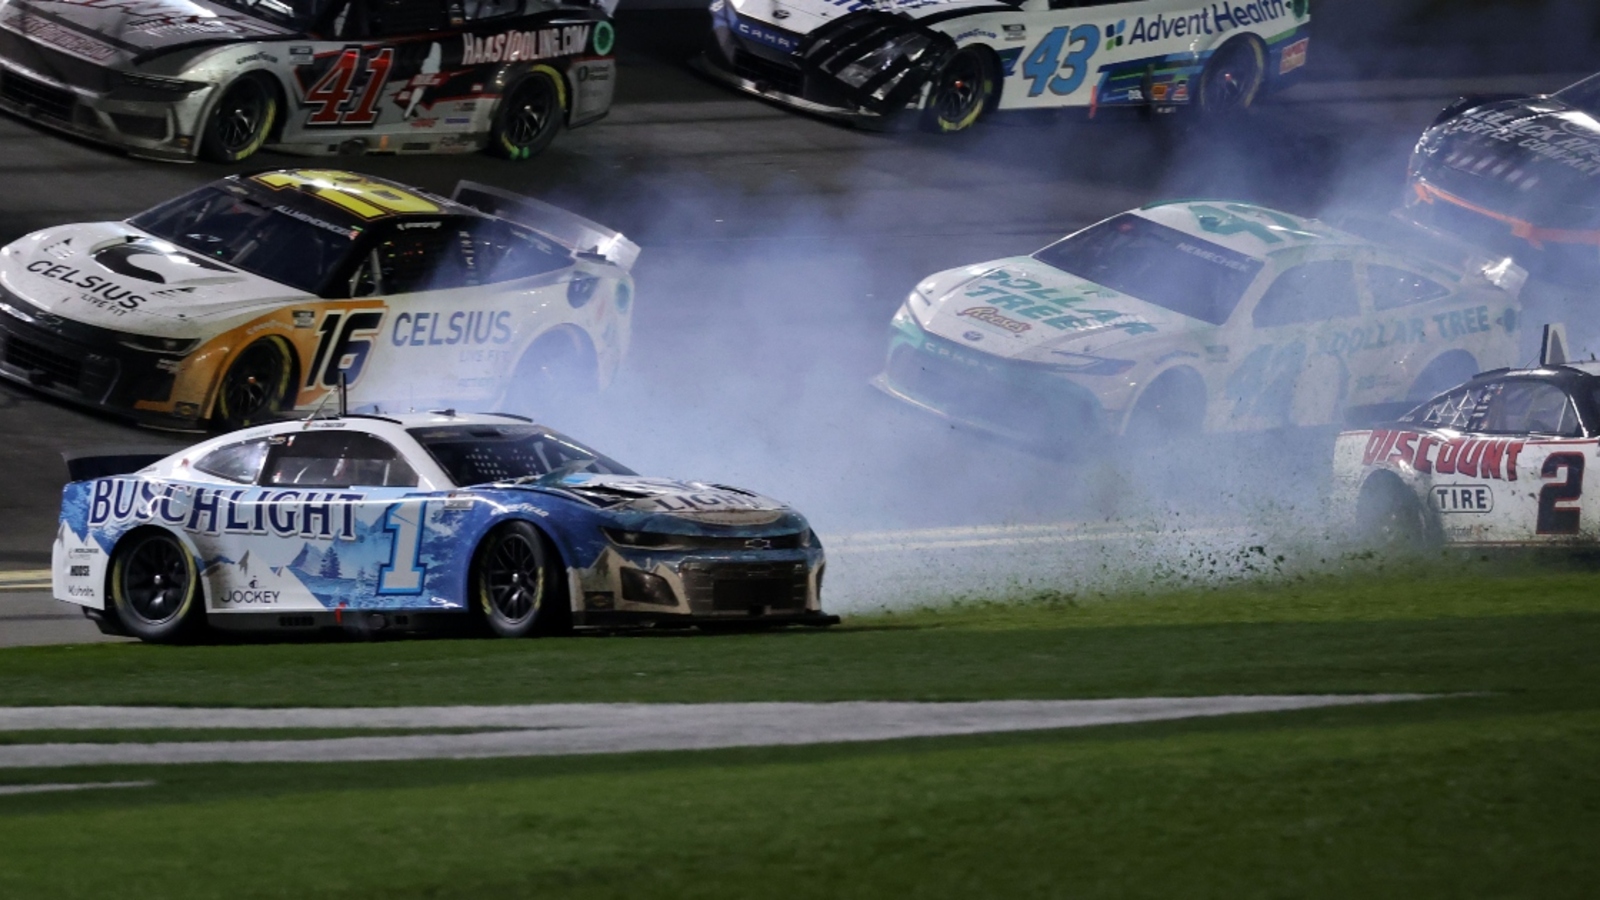 Ross Chastain offers no apologies for late Daytona 500 wreck, racing for win at white flag